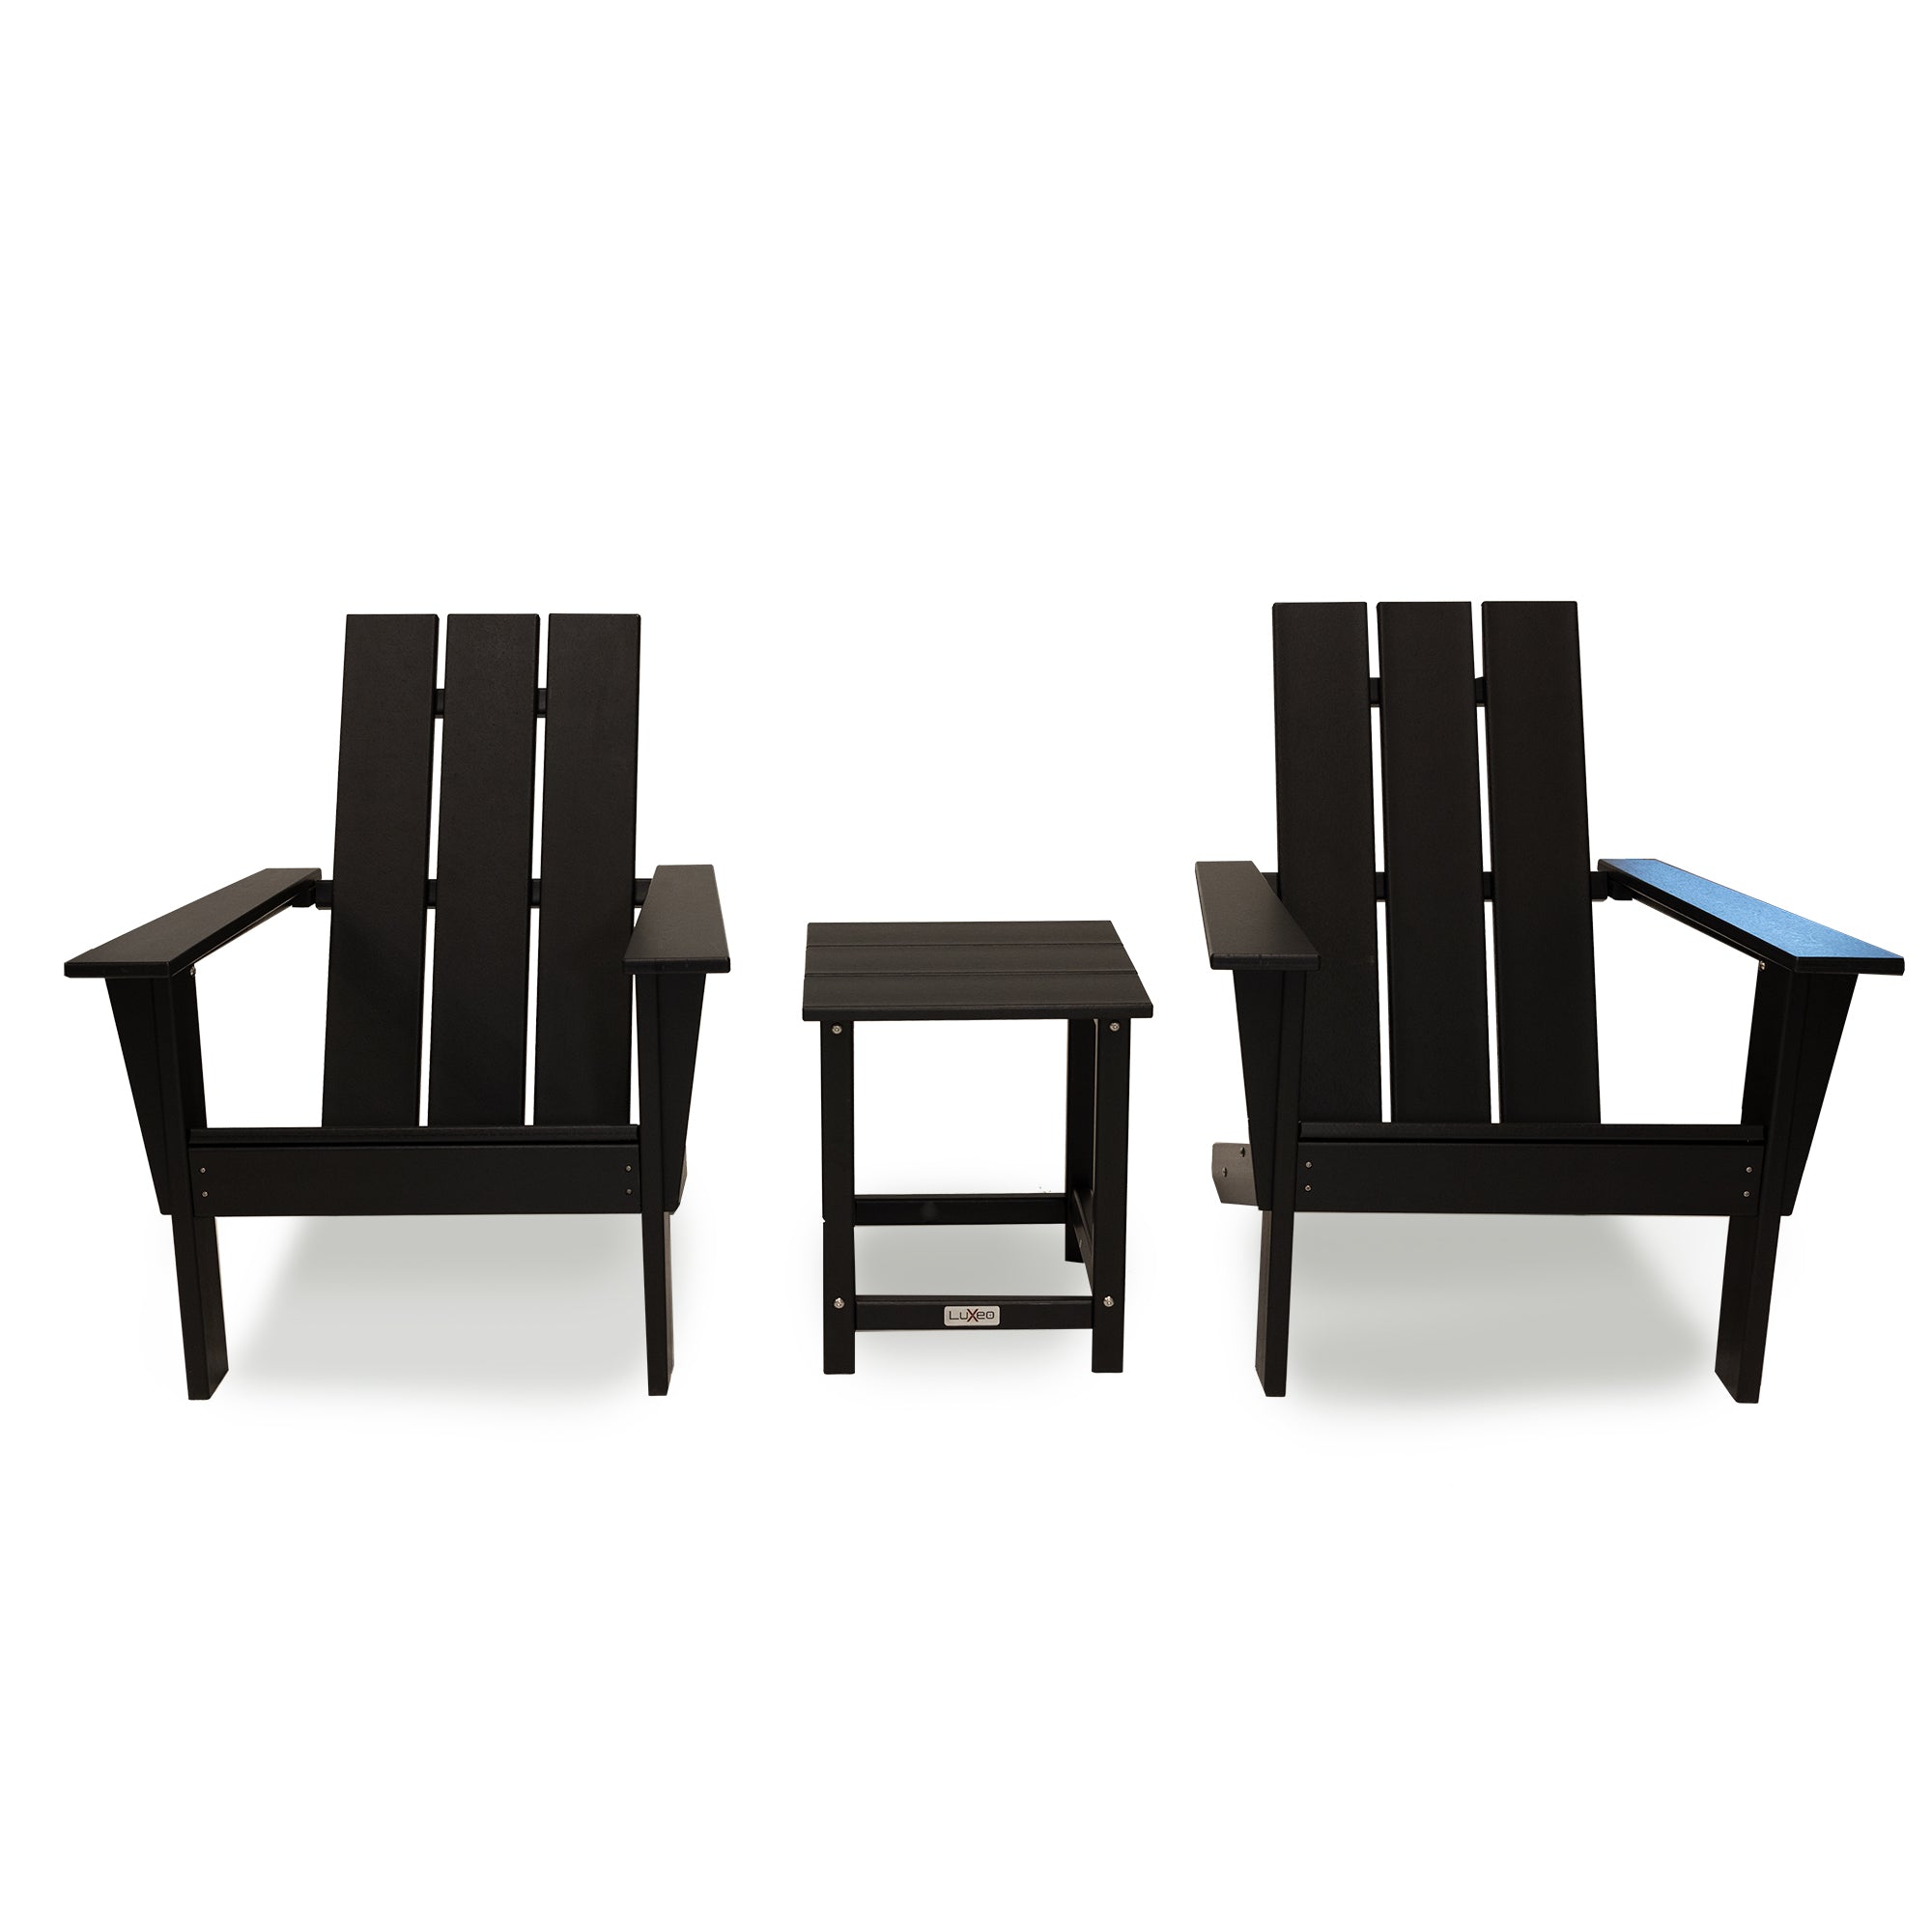 Arcadia Outdoor Patio Adirondack Chair and Table Set (3-Piece)